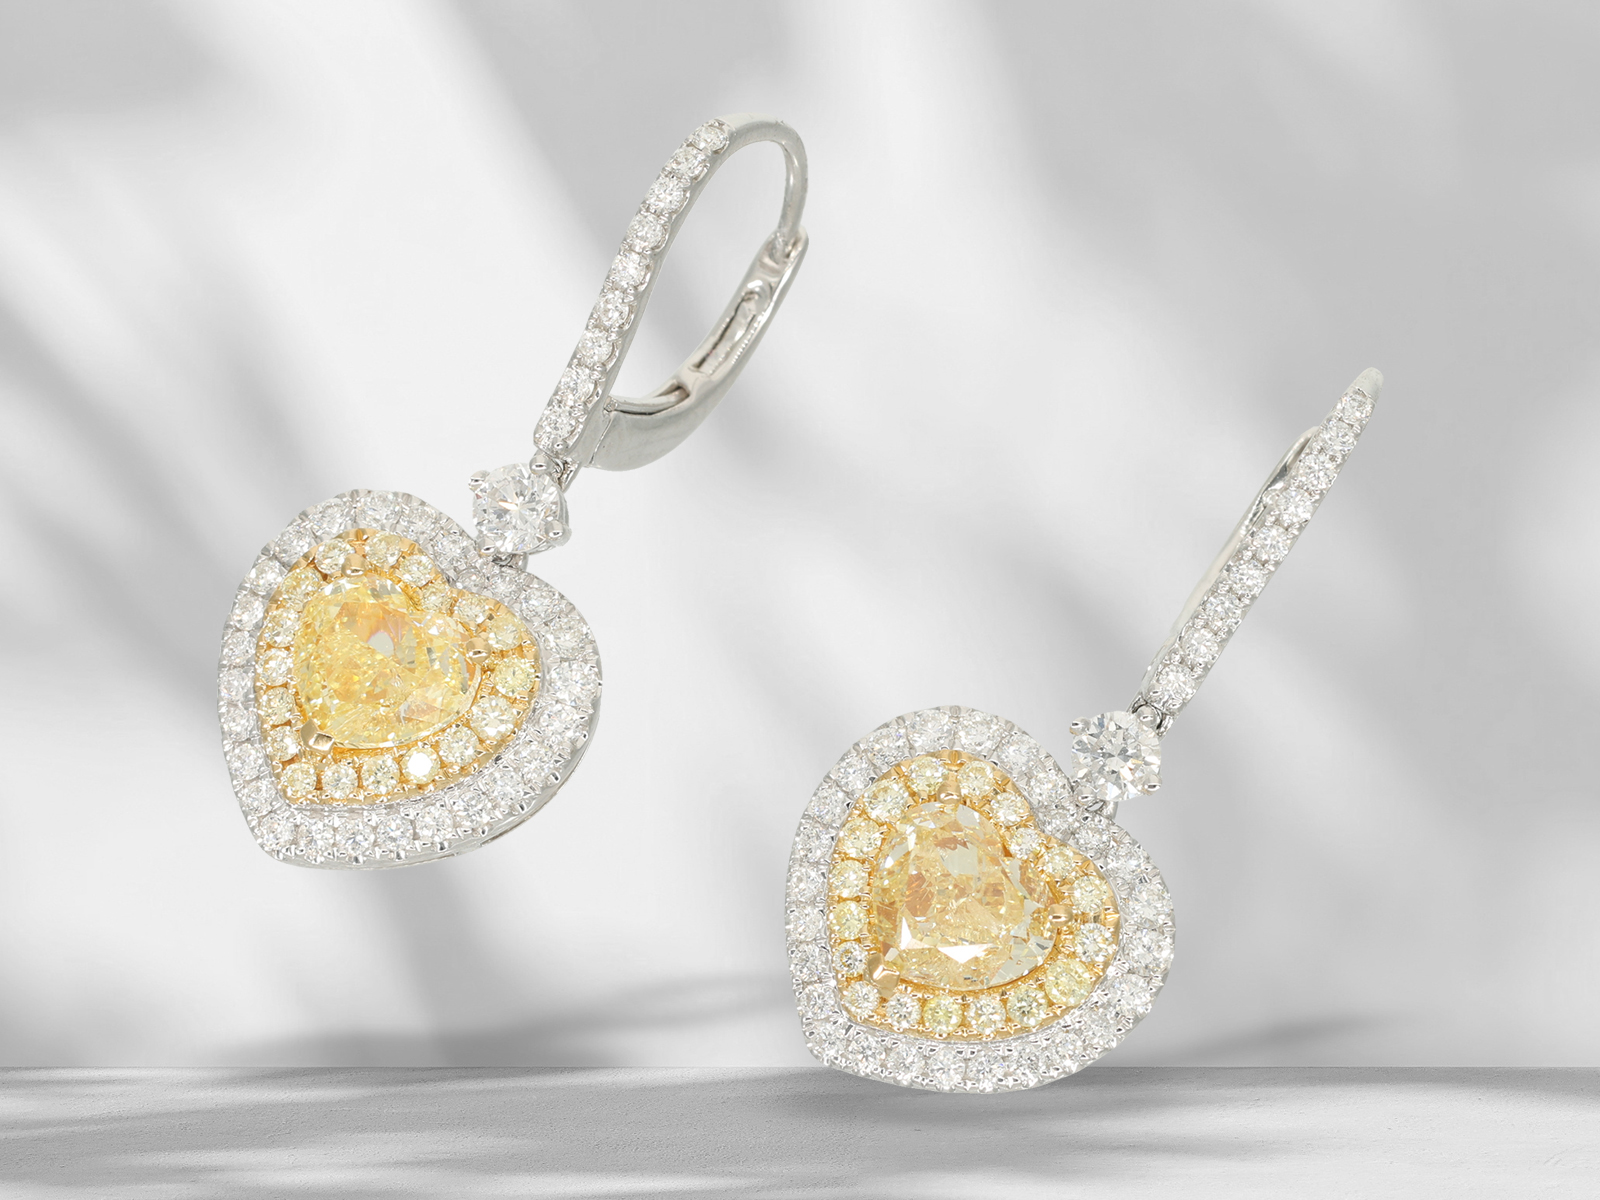 Earrings: High quality earrings set with brilliant-cut diamonds, 2 x 1ct fancy light yellow - Image 7 of 8